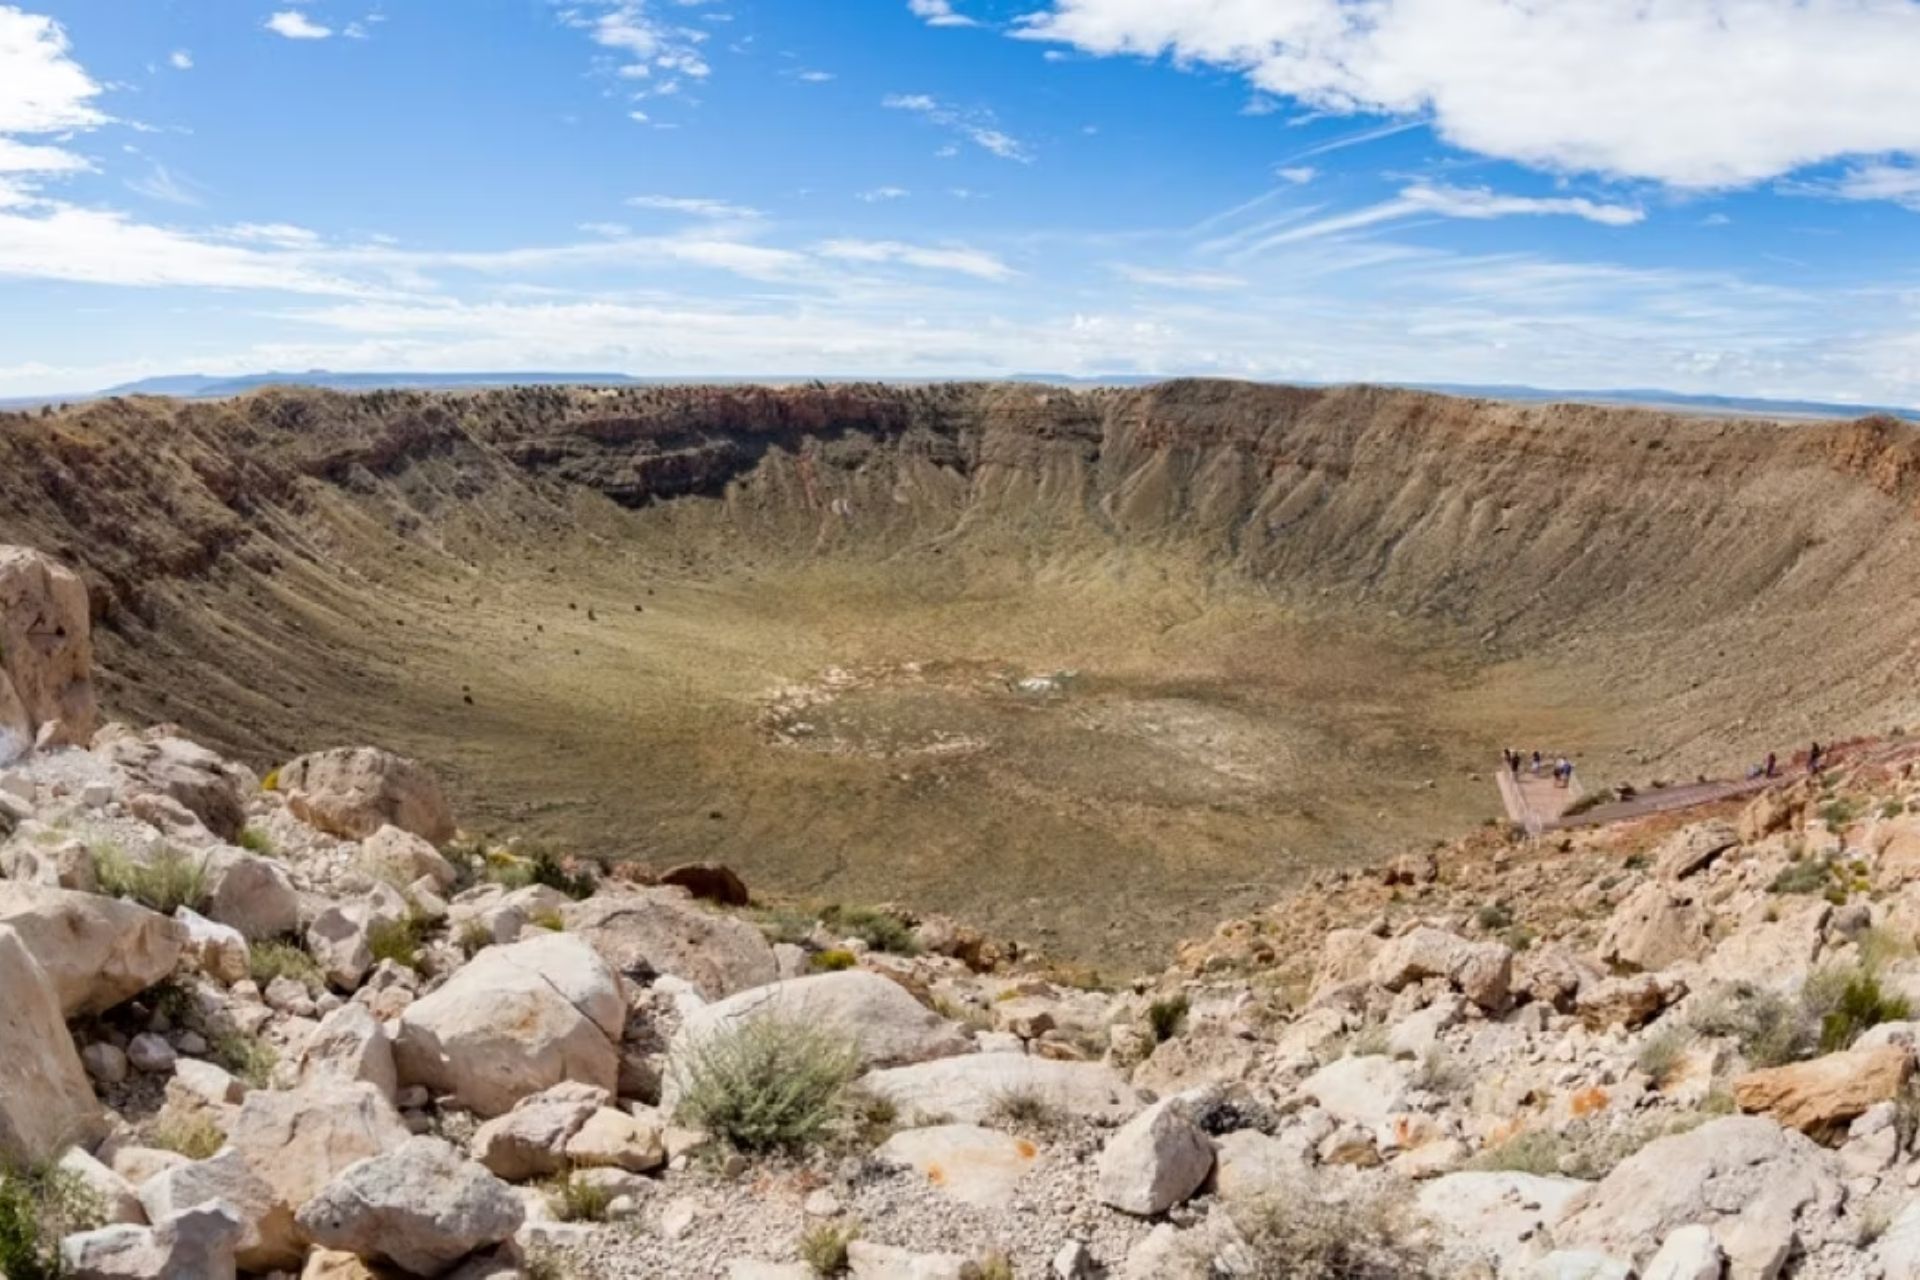 View of the Meteor Crater, Winslow, Arizona 